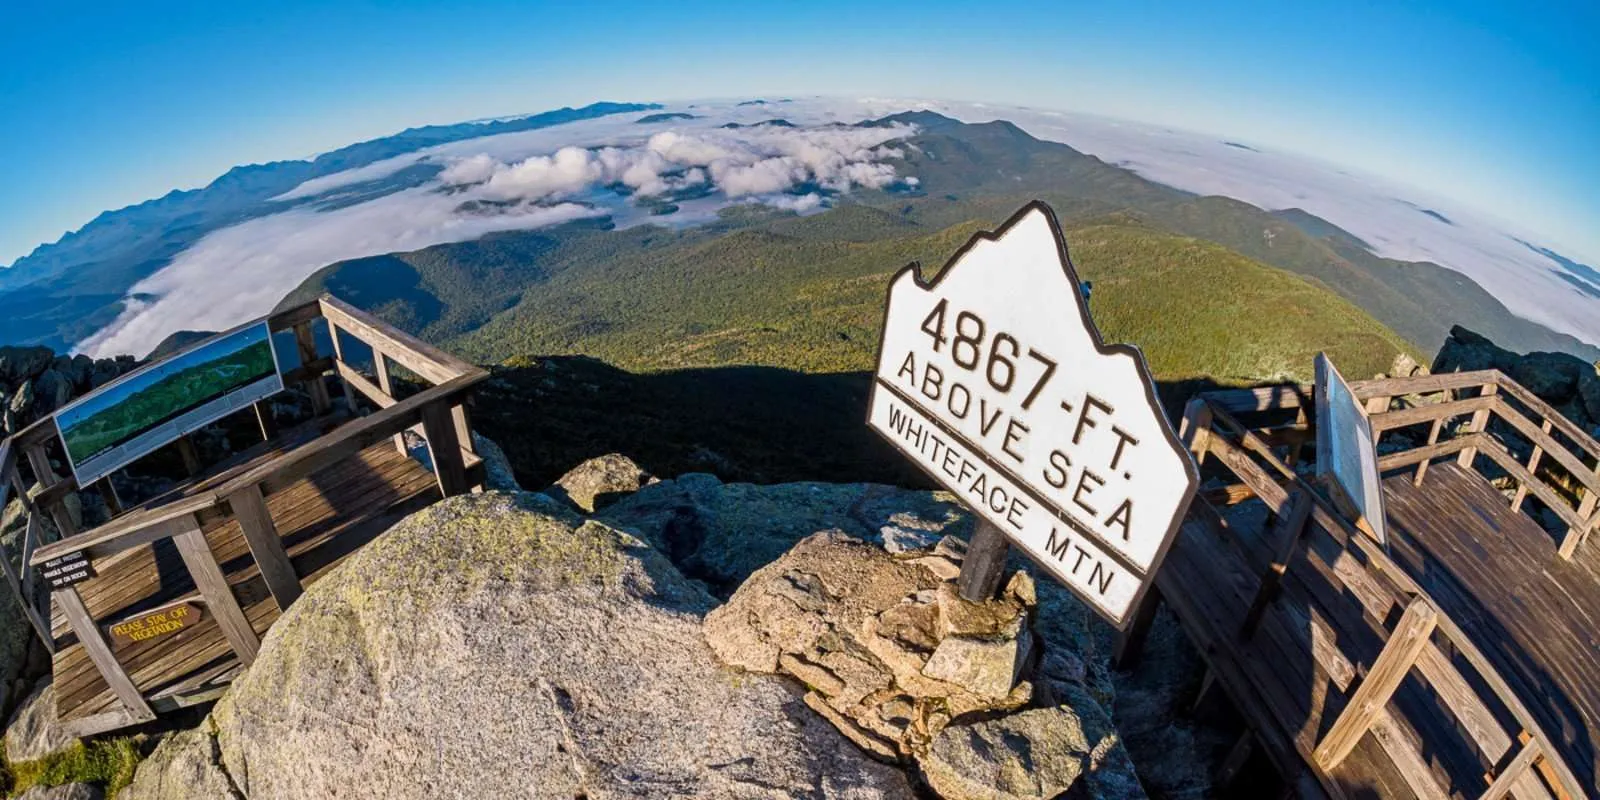 Aerial view of Whiteface Mountain summit signage which reads 4867 Ft above sea